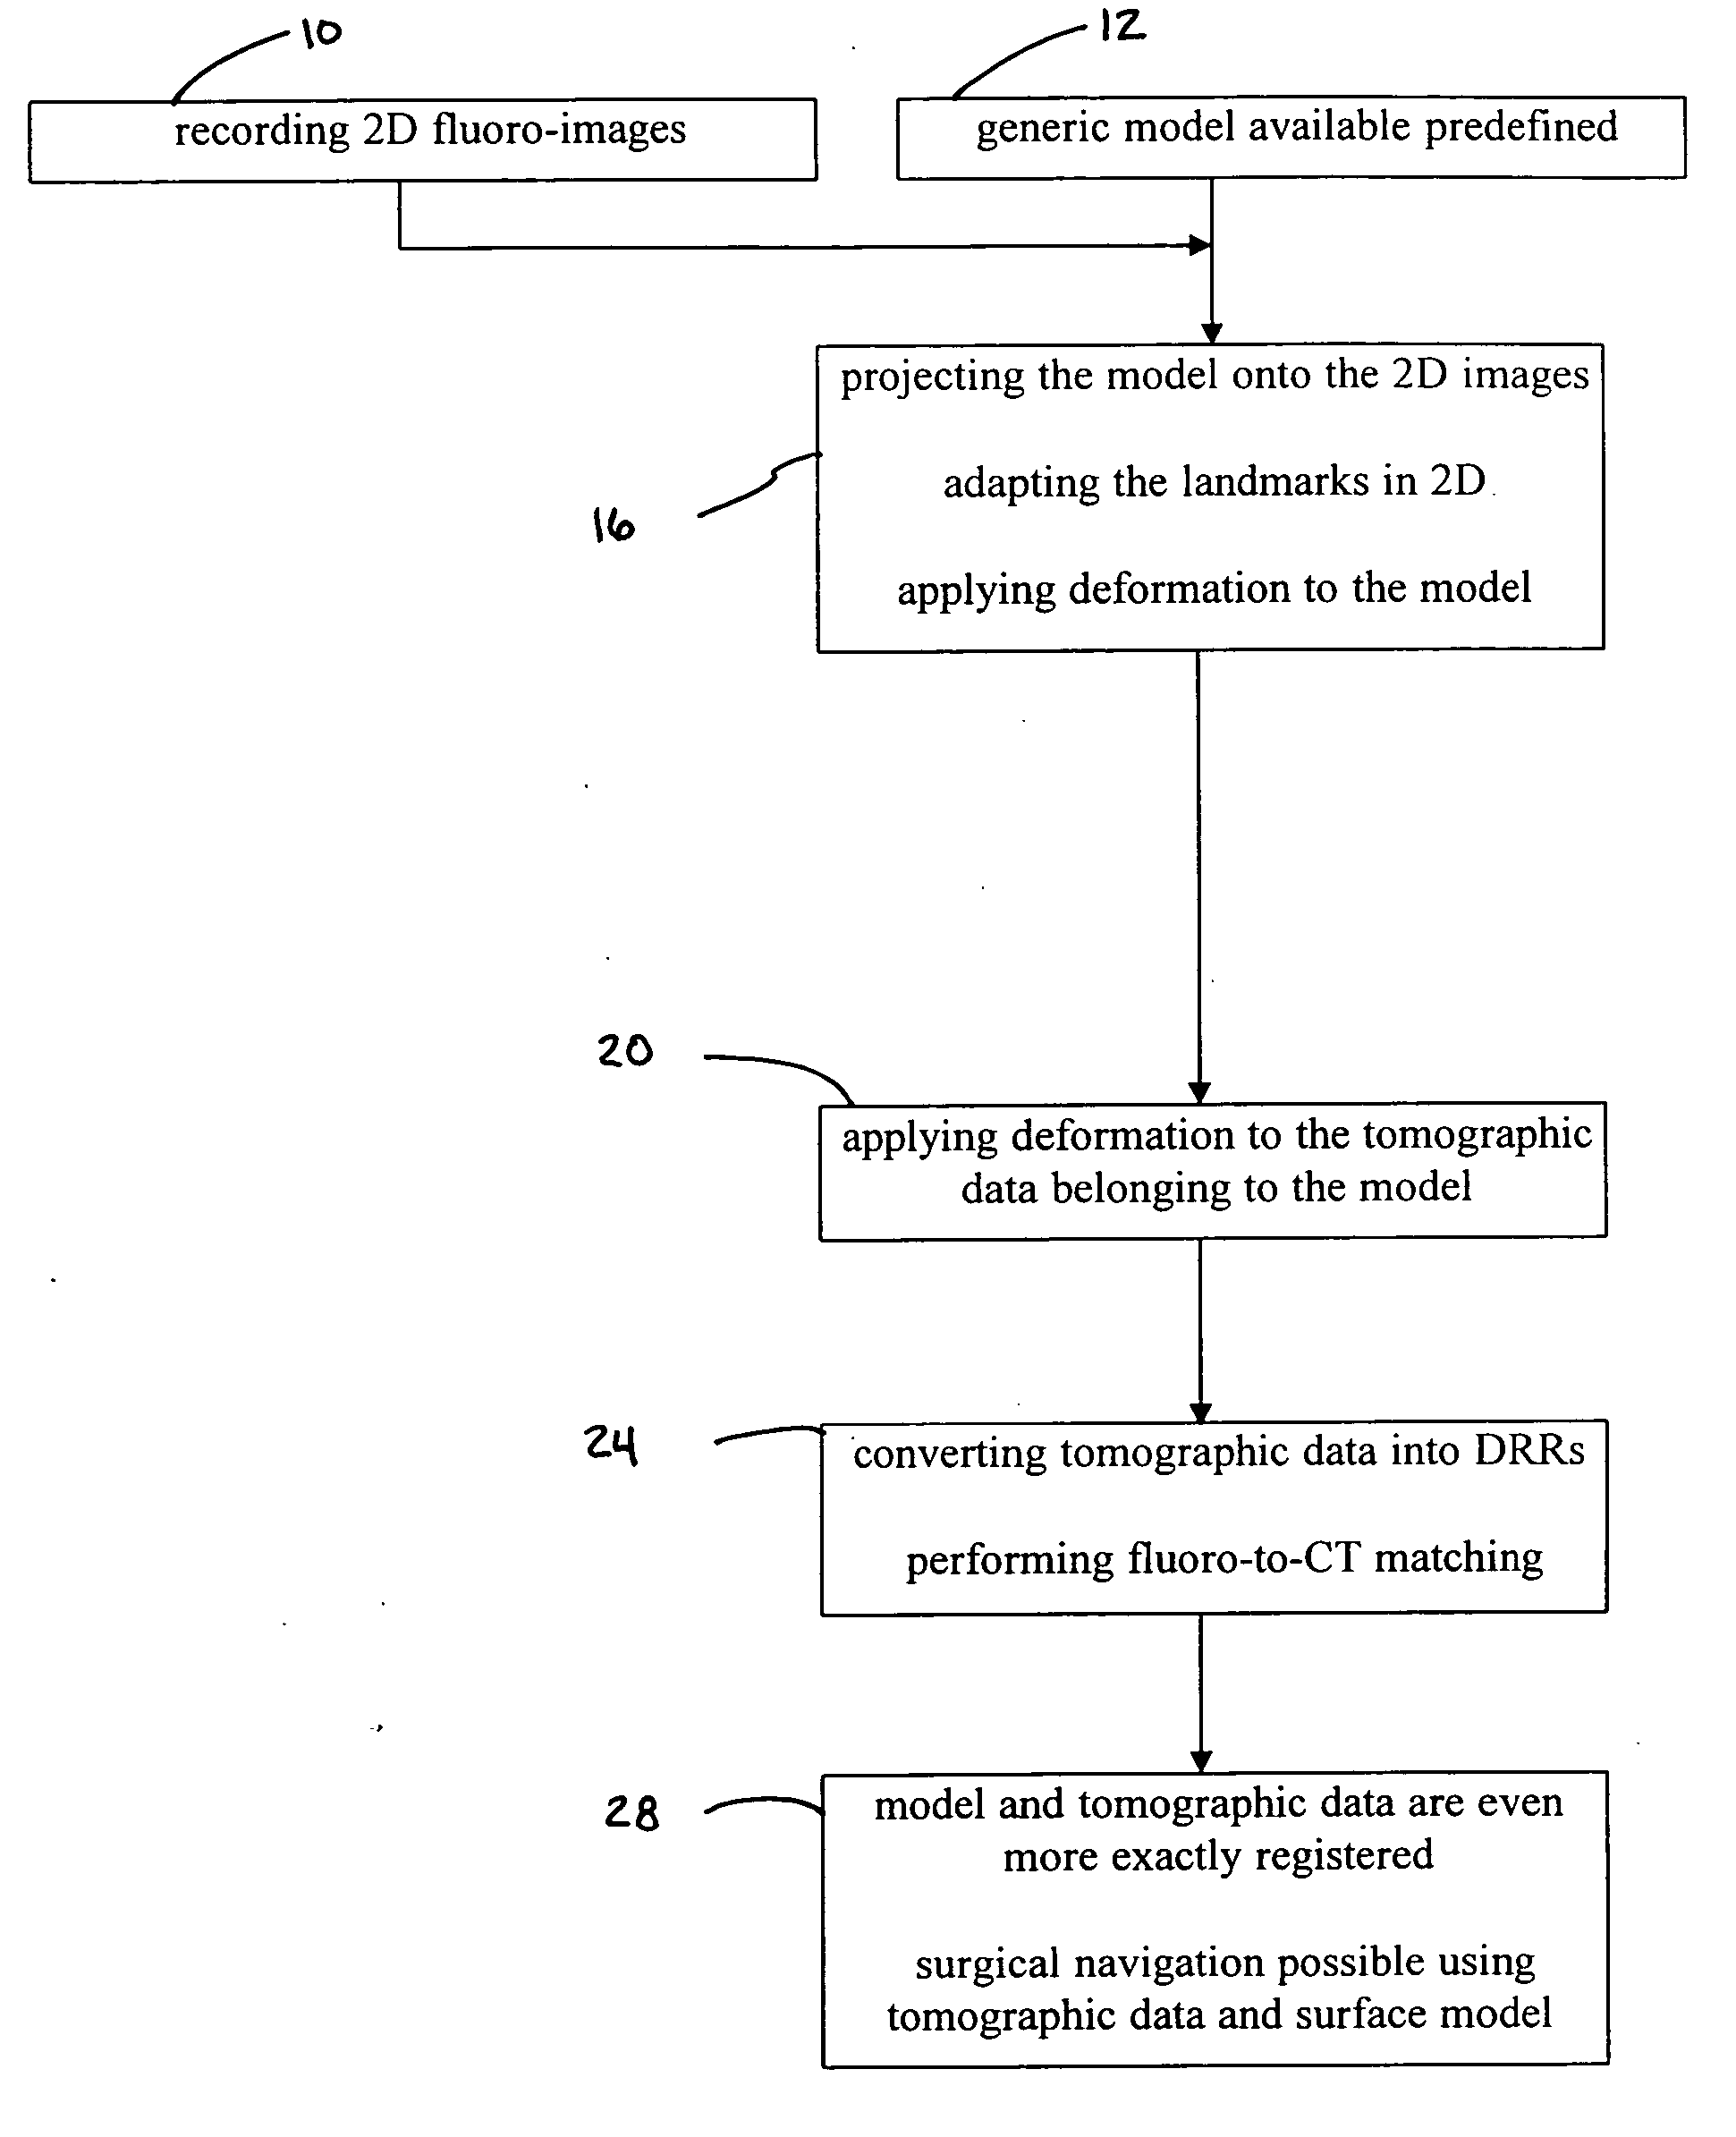 Planning and navigation assistance using two-dimensionally adapted generic and detected patient data